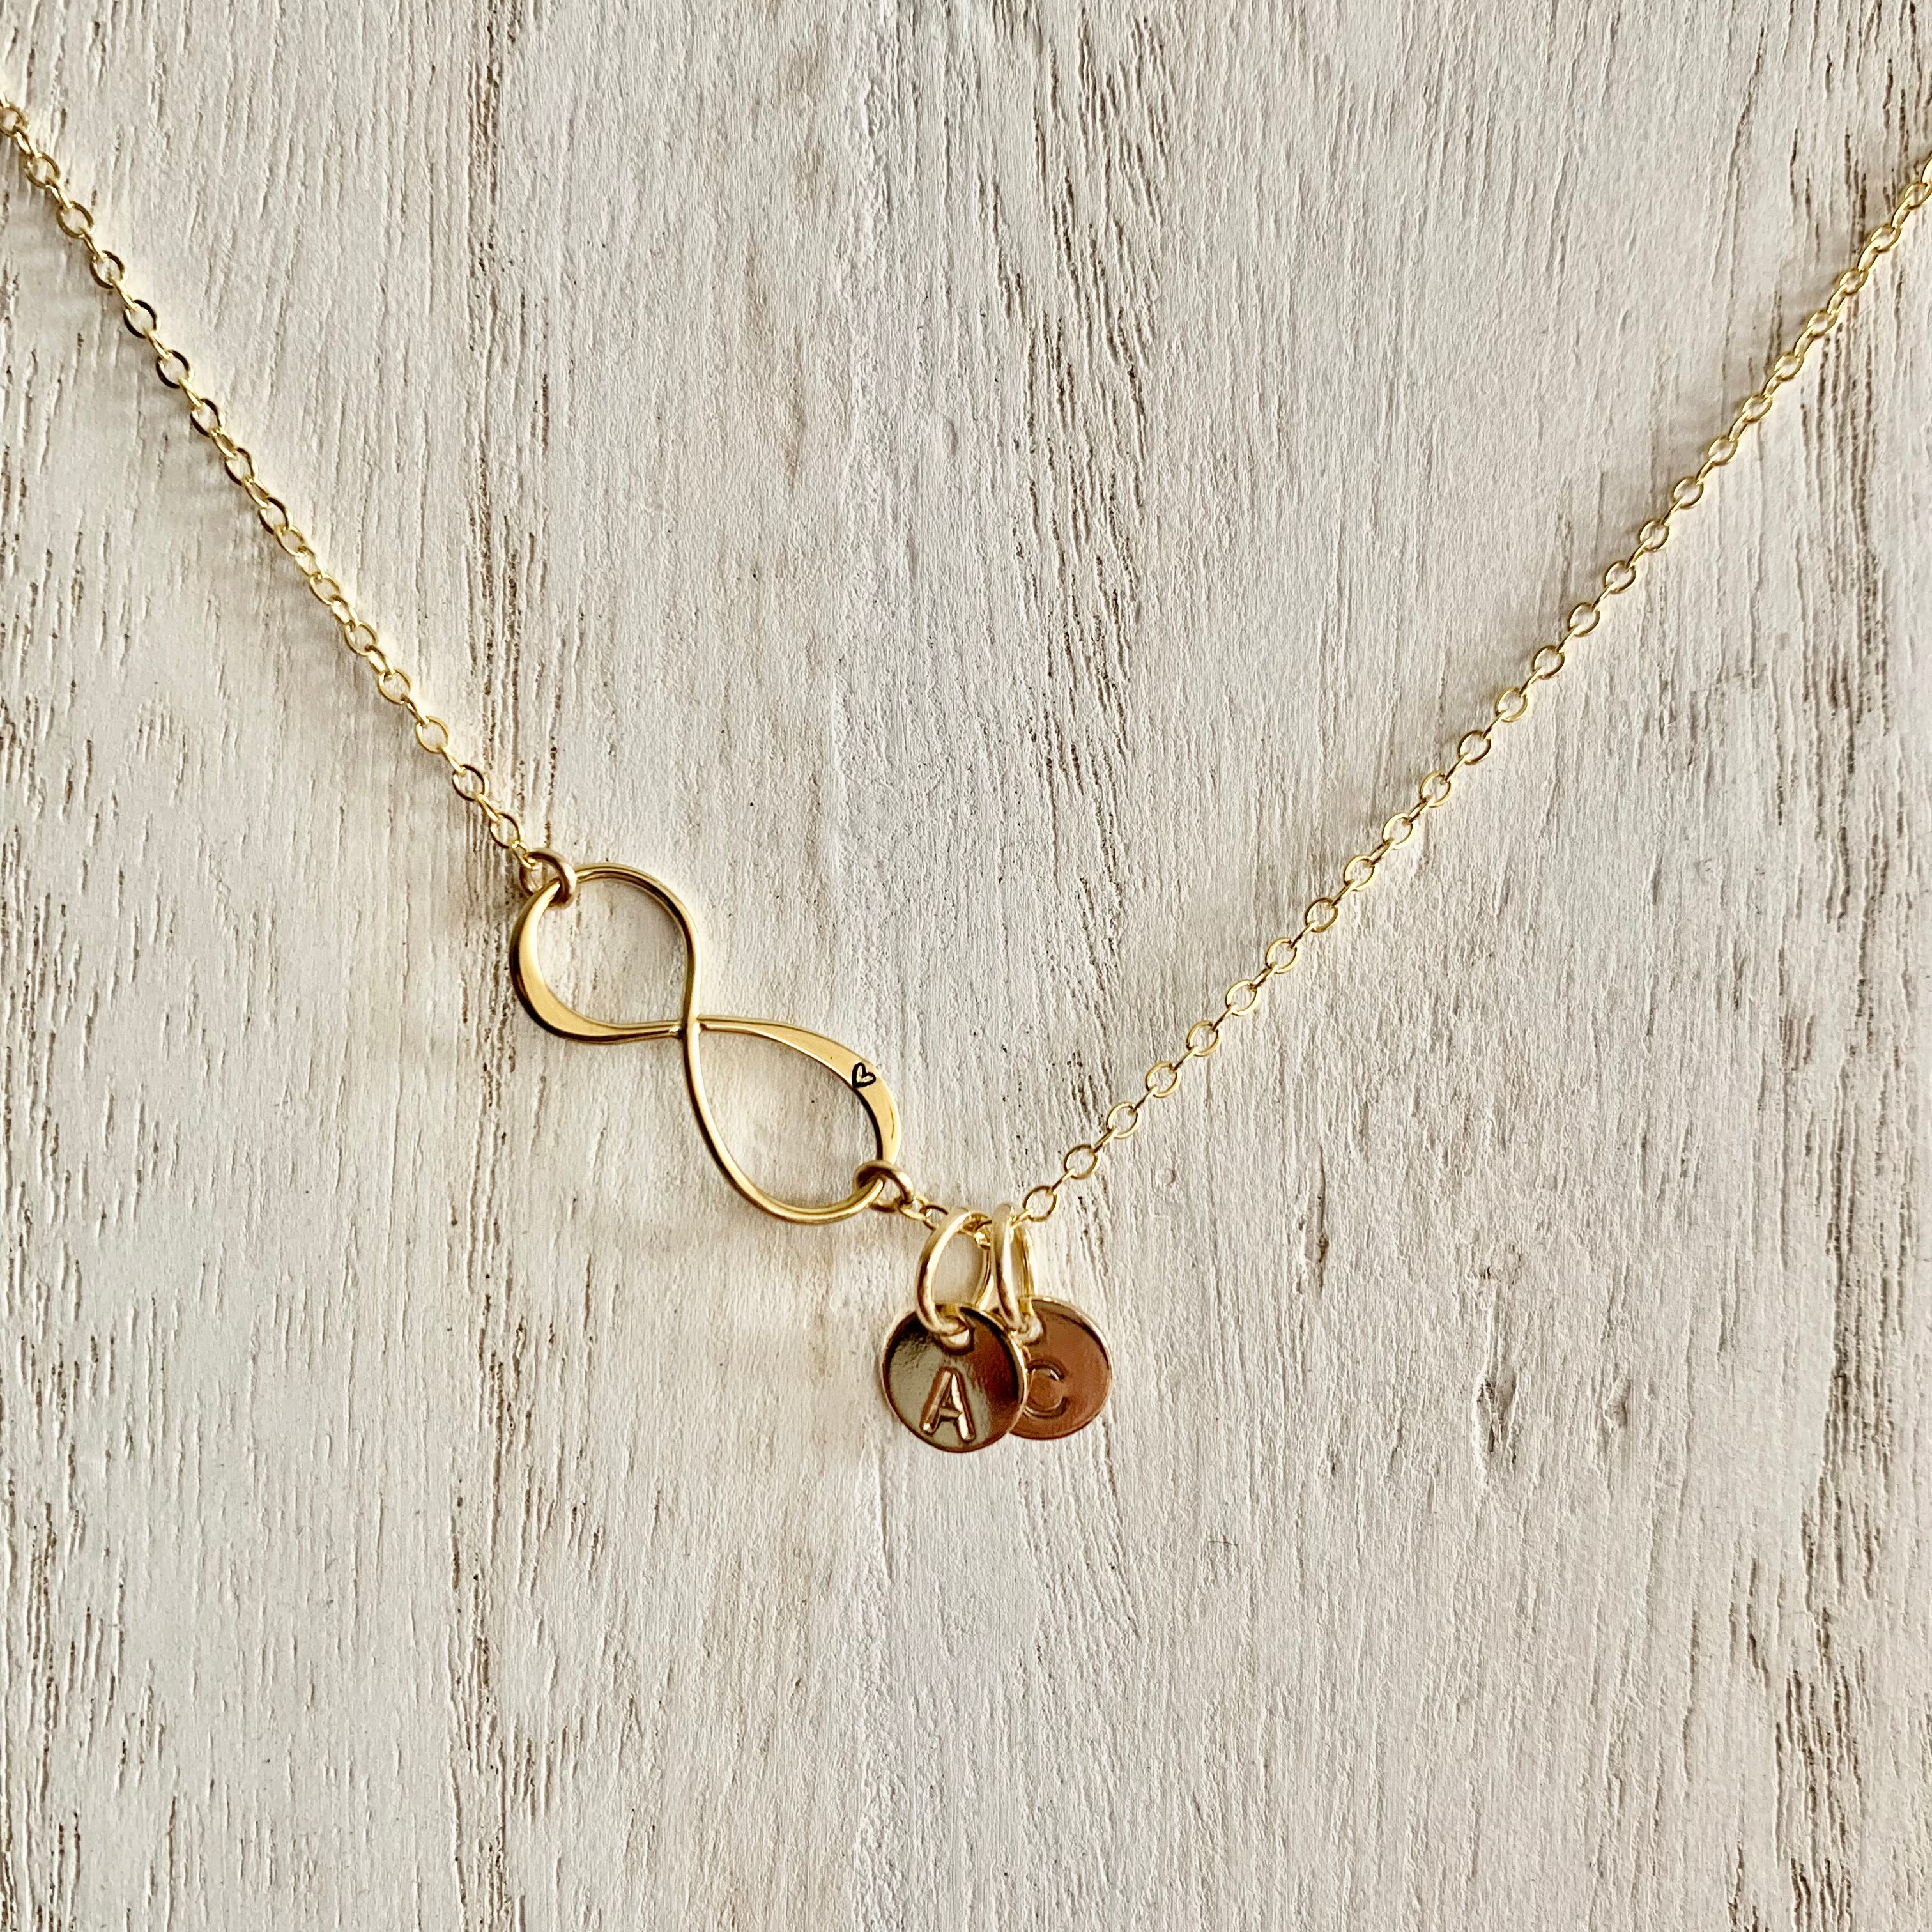 Infinity initials necklace - love you forever - gift for mom, wife, girlfriend, best friend, sister - initial necklace - two initials